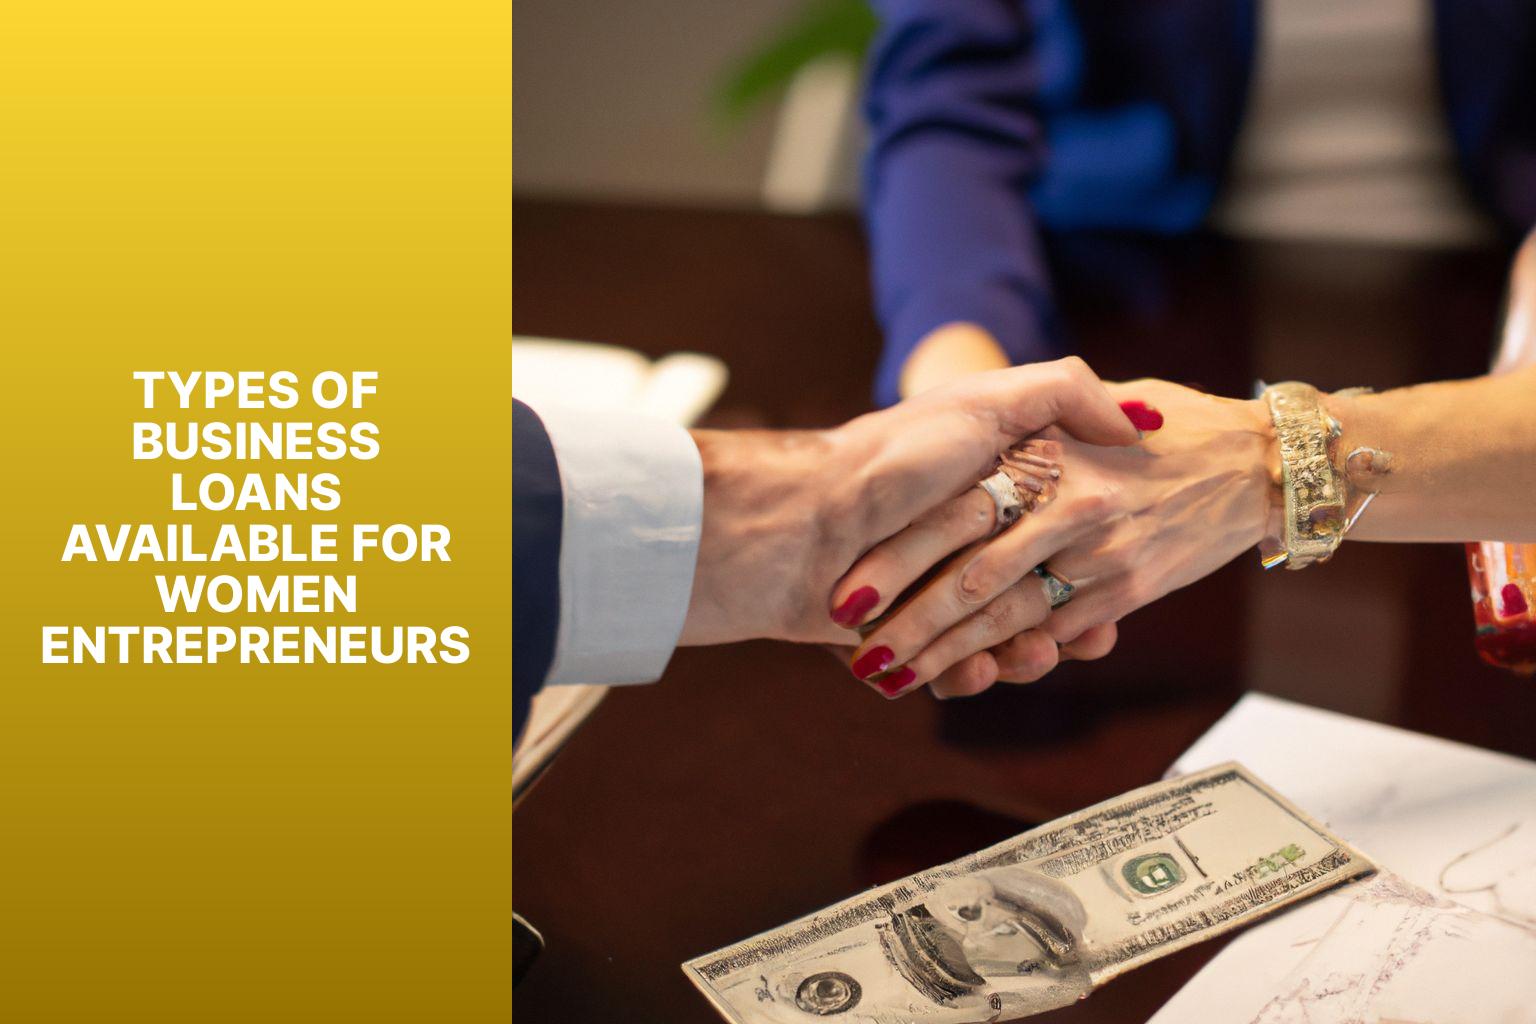 Types of Business Loans Available for Women Entrepreneurs - Empowering Women Entrepreneurs: A Comprehensive Guide to Business Loans 